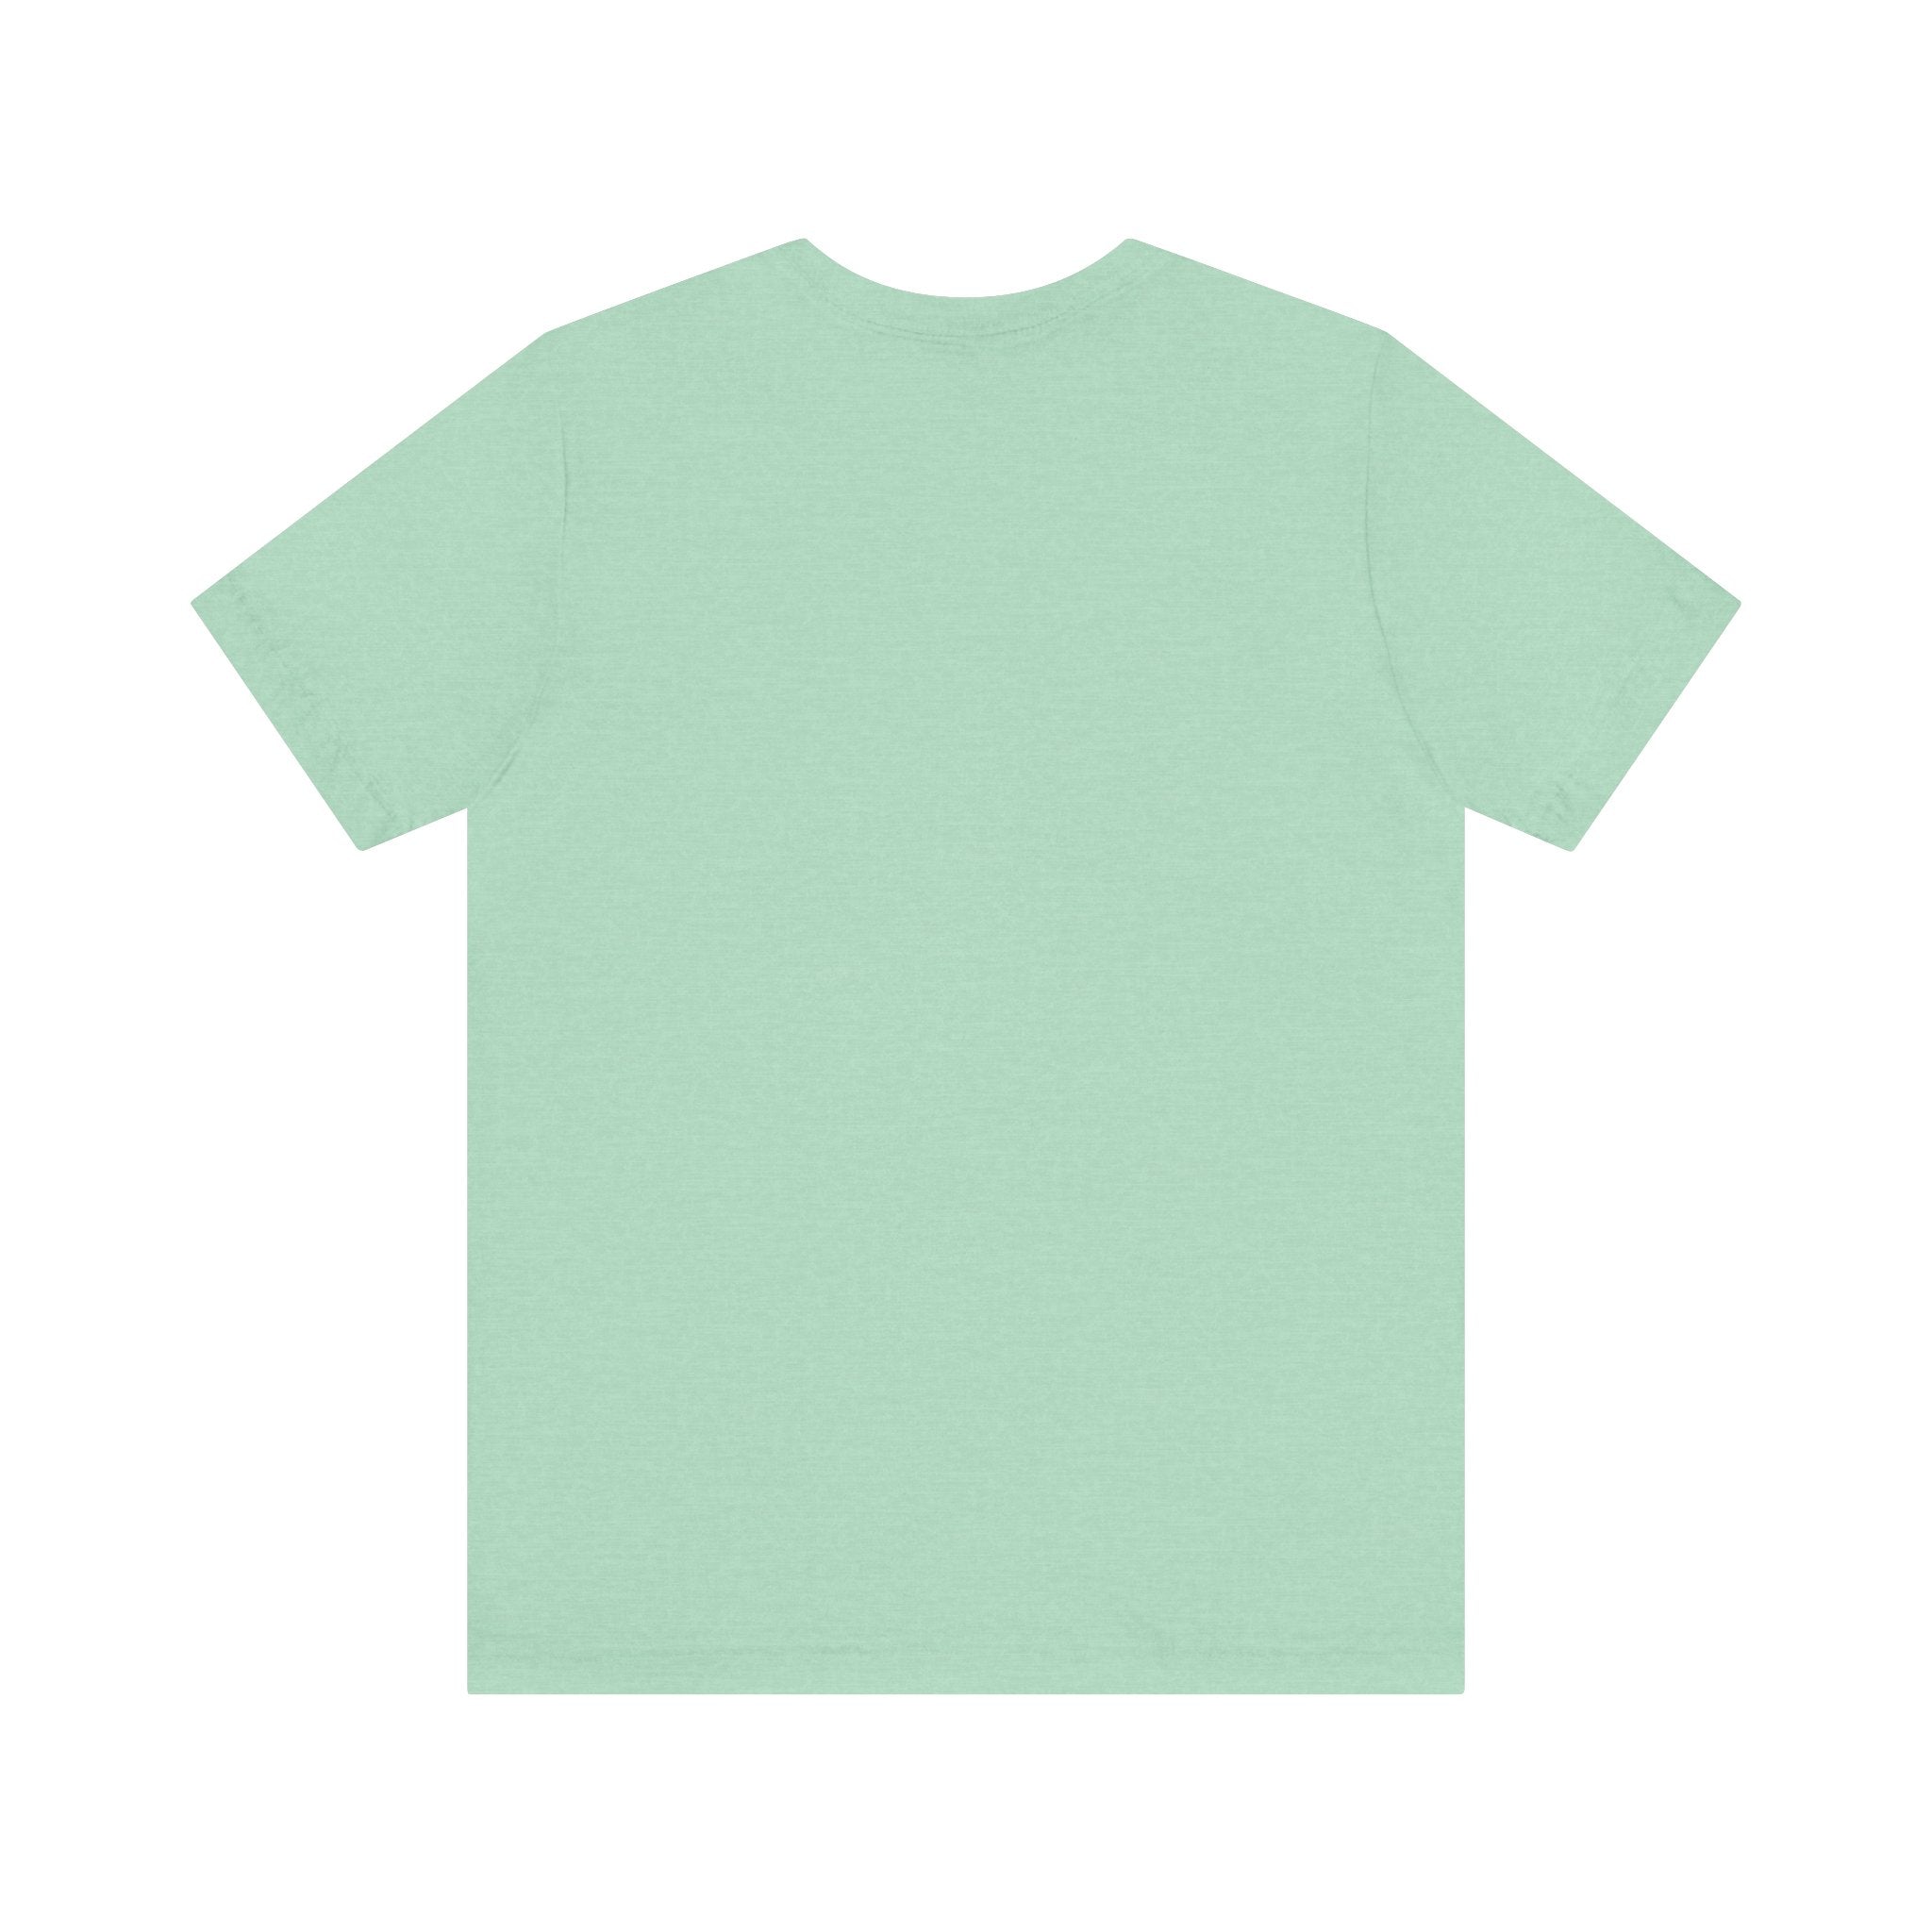 Direct-to-garment printed light green t-shirt with white logo from Catch the Waves - Surfing T-Shirt - Soulshinecreators - Unisex Jersey Short Sleeve